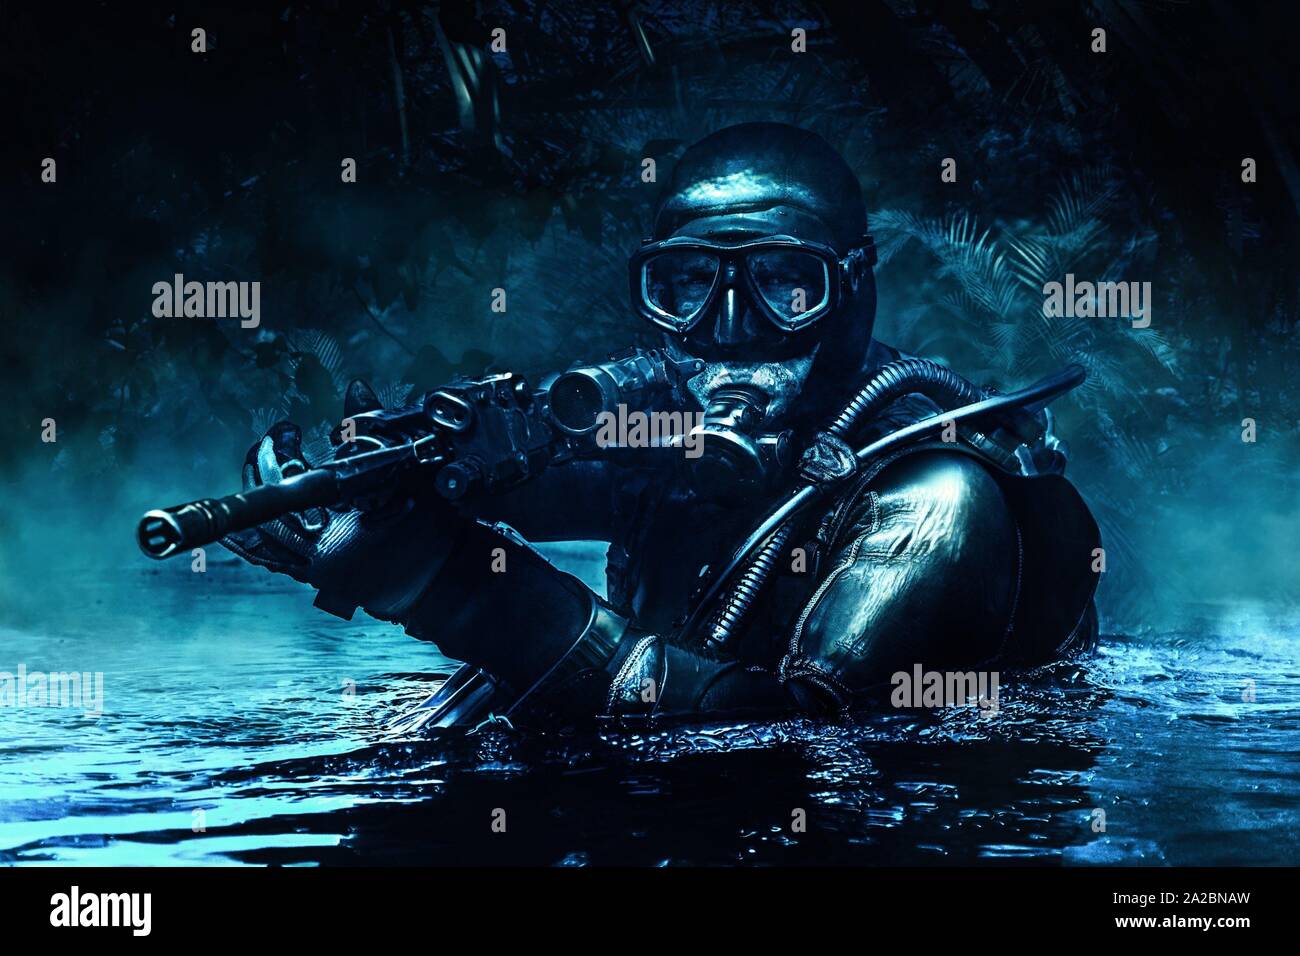 Combat diver of special forces operations unit frogmen comes up in jungle in diving gear. Dark night, moonlight, diversionary operation with weapon. Stock Photo